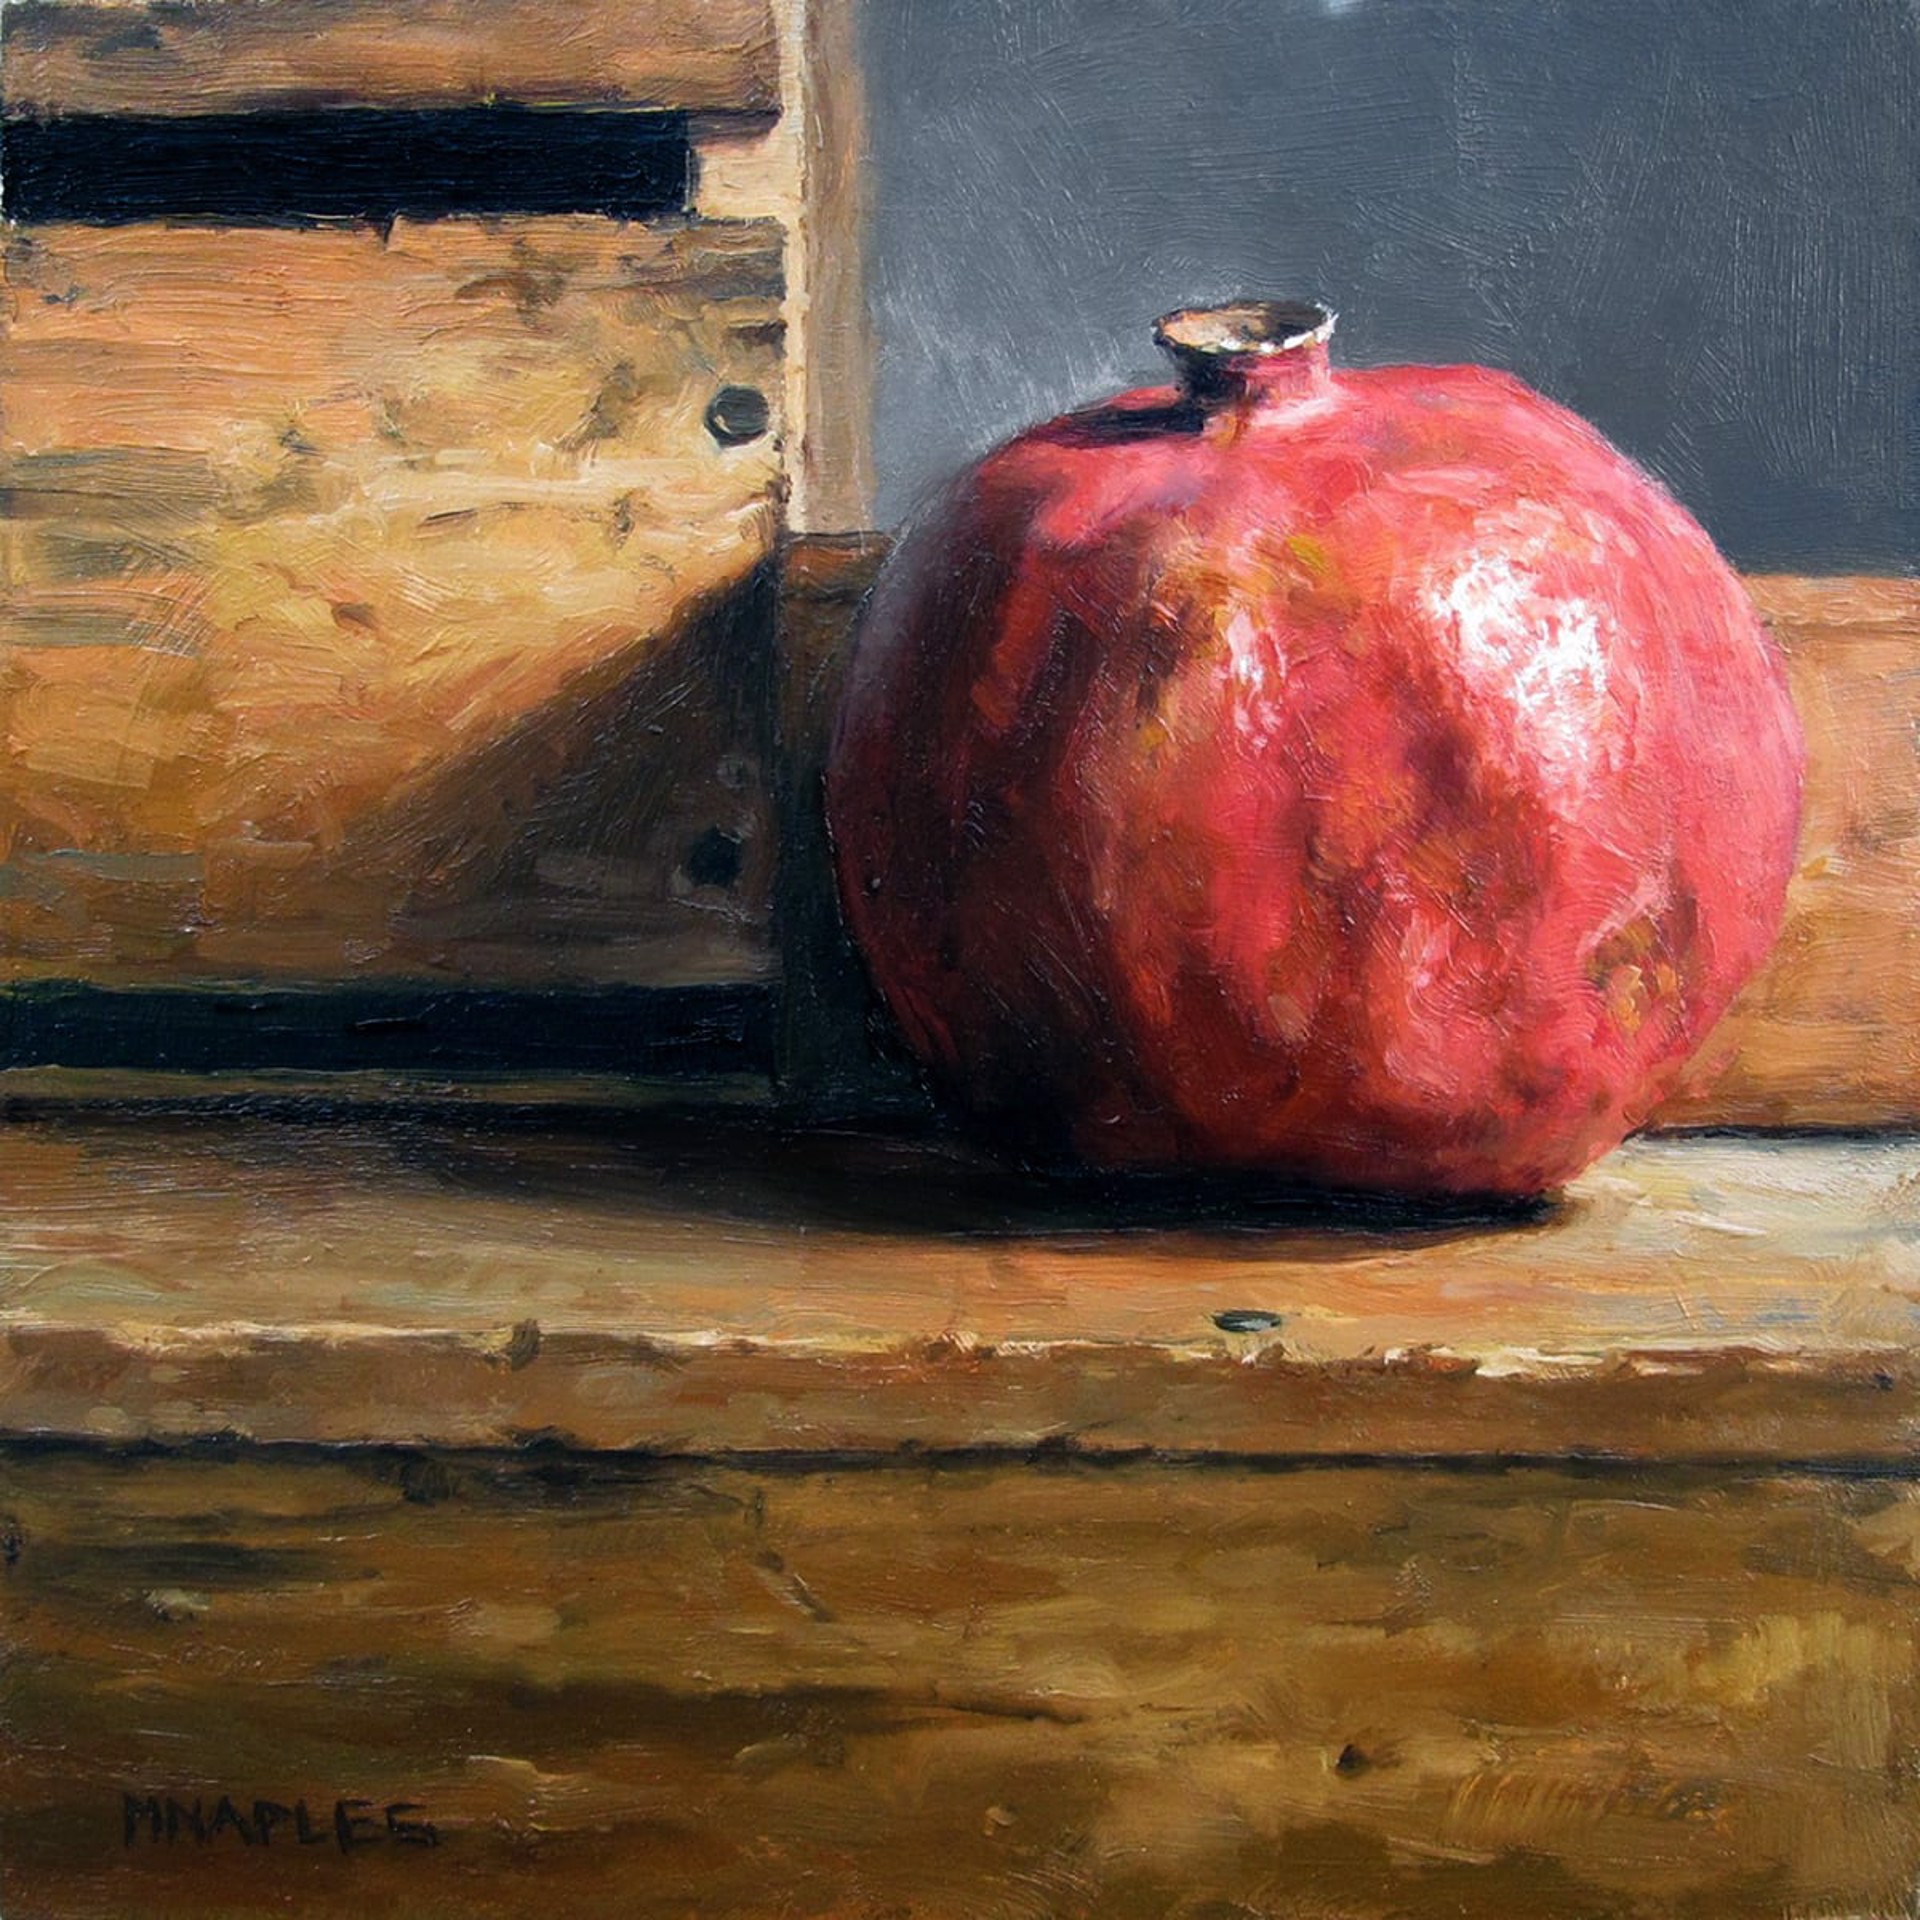 Pomegranate with Antique Wood by Michael Naples